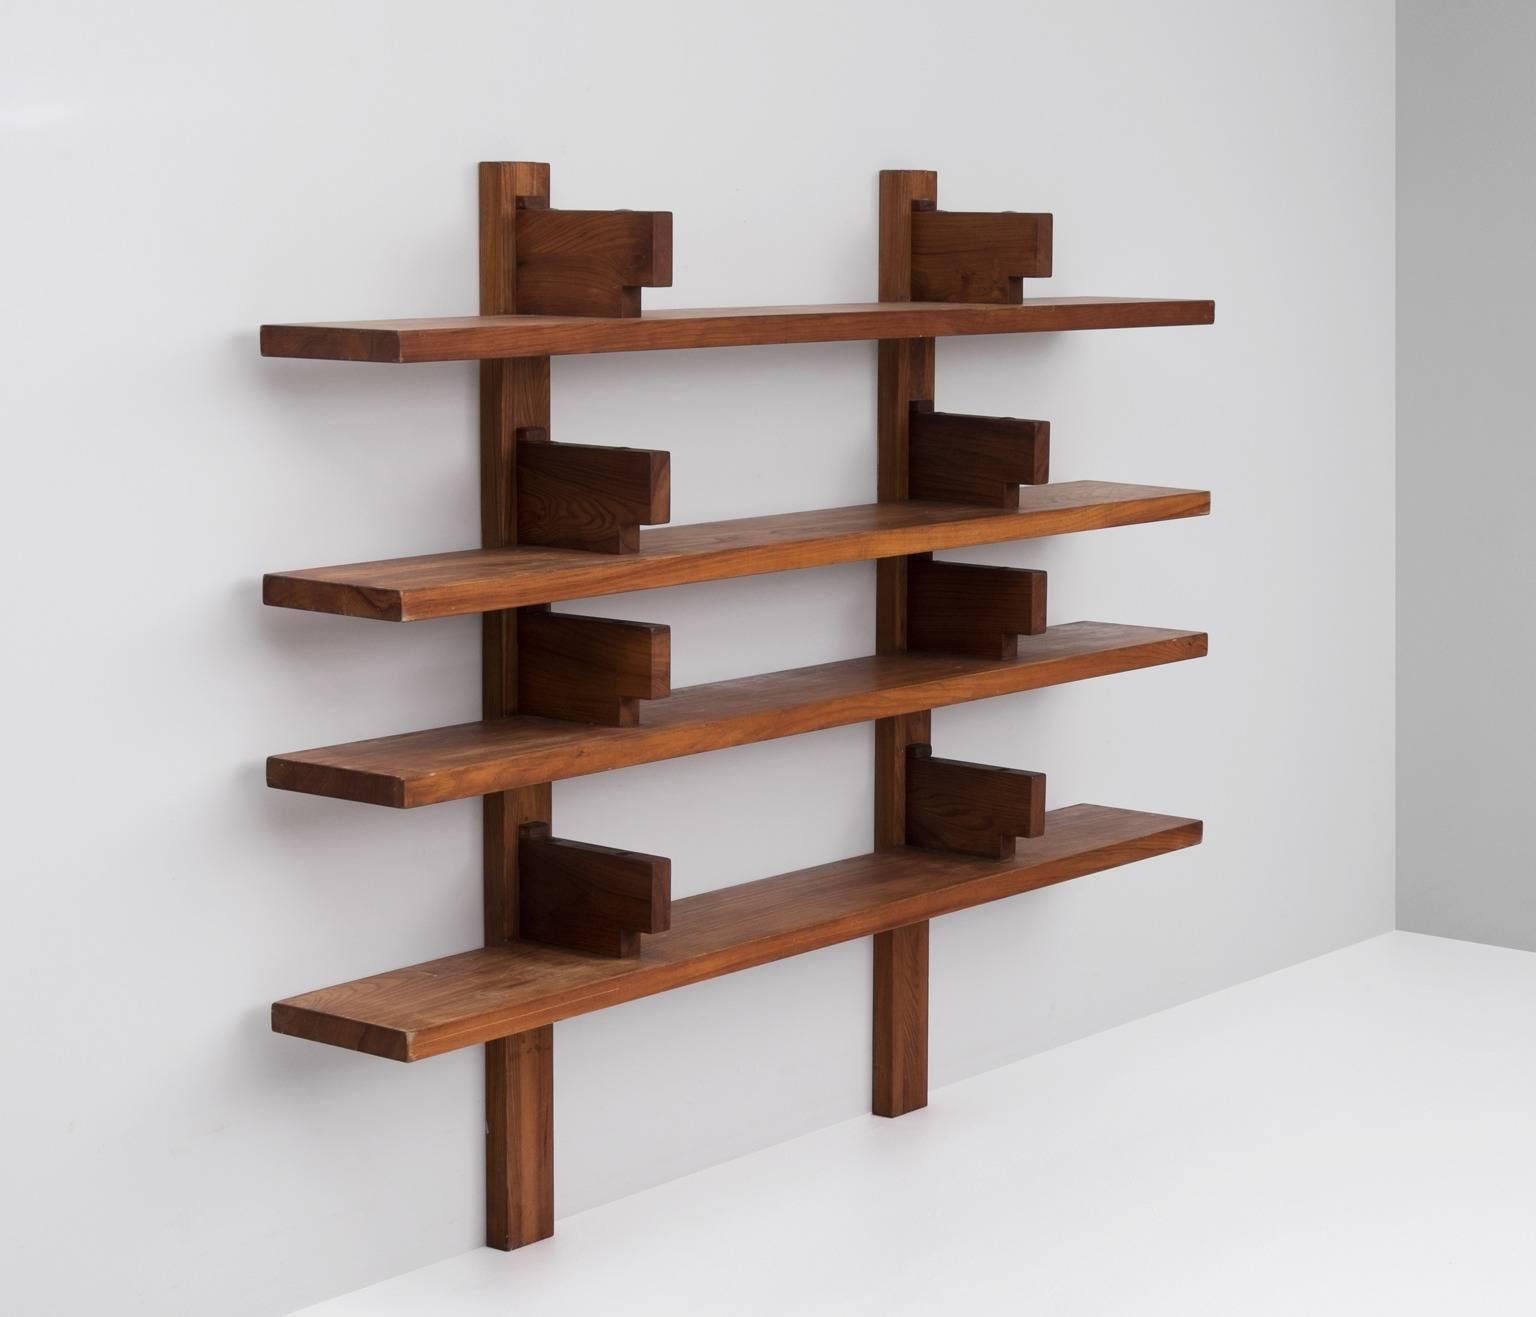 Bibliothèque, model no. B1, in elm by Pierre Chapo, France, 1960s. 

Model 'B17 - bibliothèque' designed by Pierre Chapo. This bookcase consist of four robust elmwood shelves that rest under the brackets. These brackets serve as a support, the